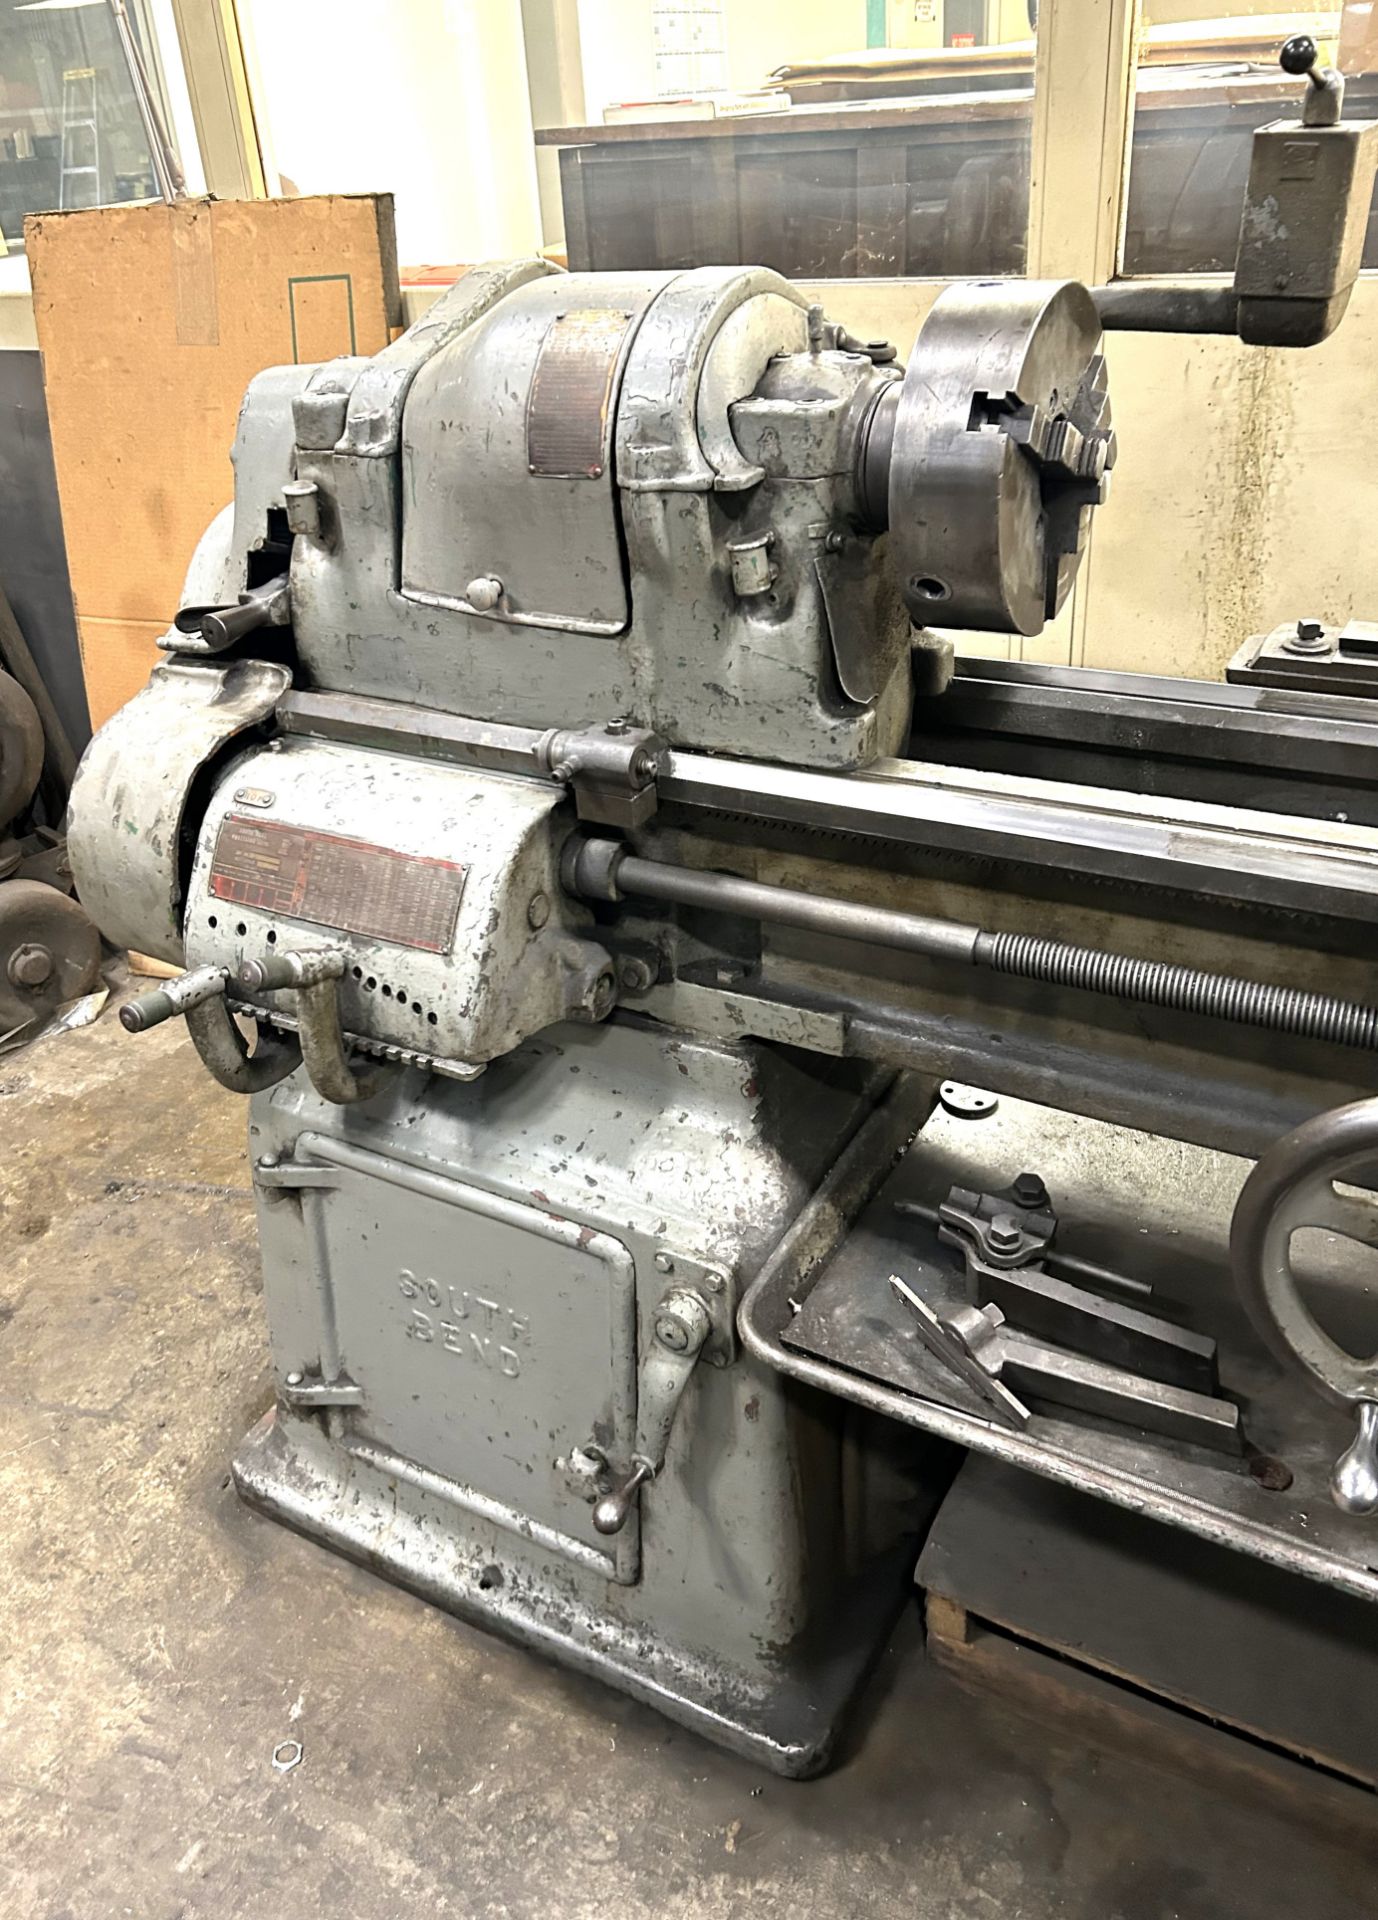 Southbend 16" x 44" Toolroom Lathe - S/N 5312HKR10, 10" 3 Jaw Chuck, Taper Attachment, Steady - Image 2 of 2